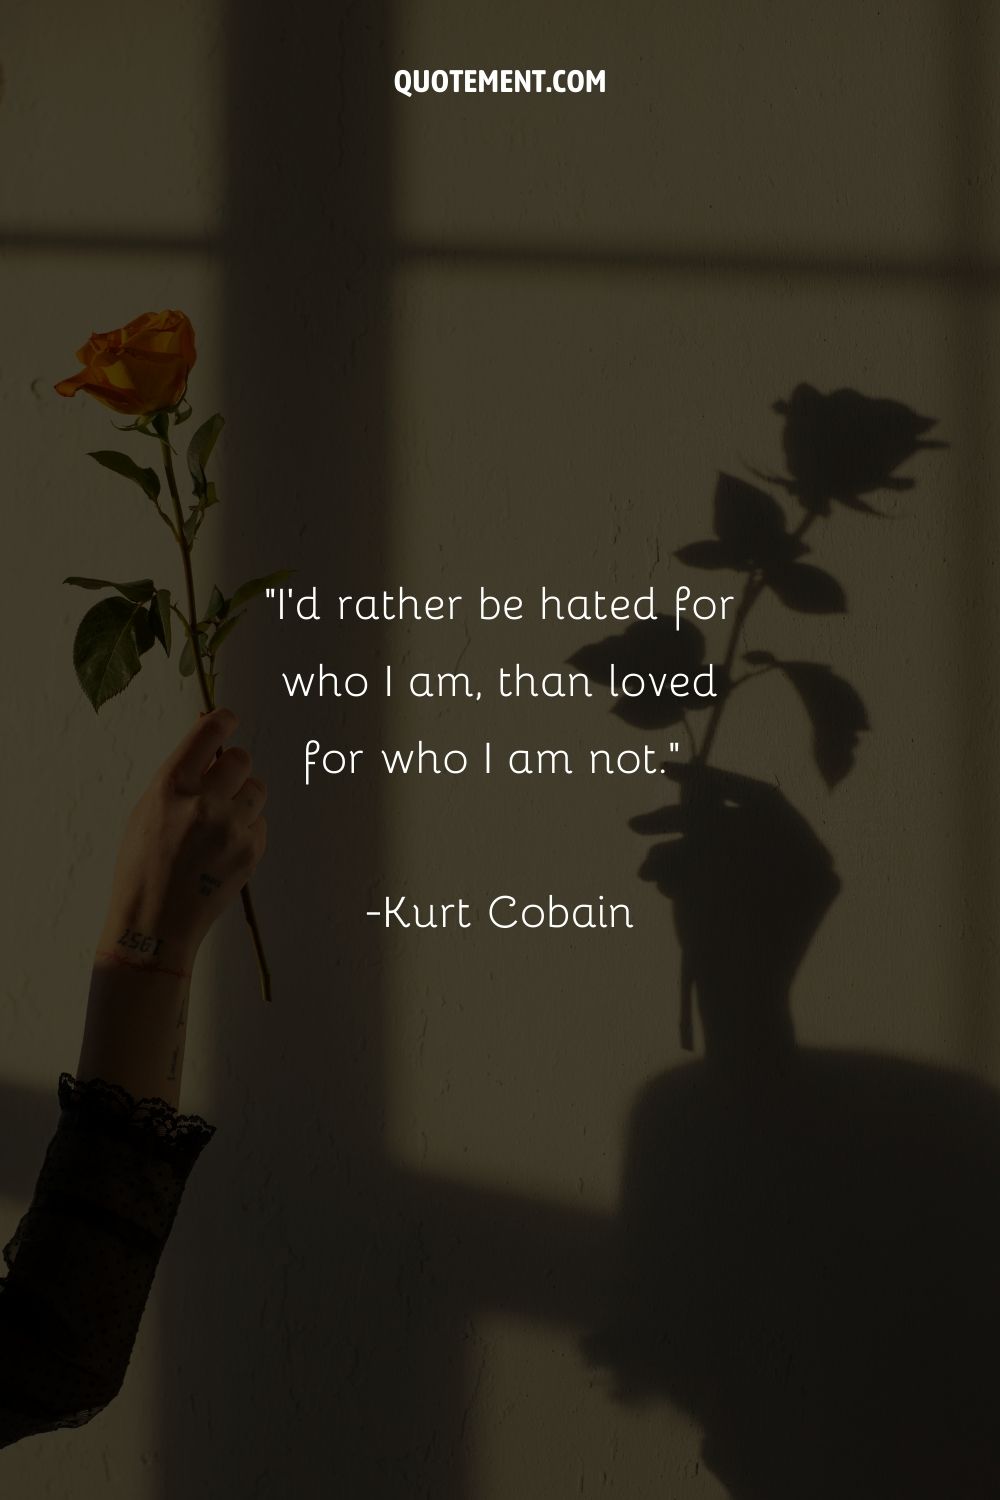 I'd rather be hated for who I am, than loved for who I am not